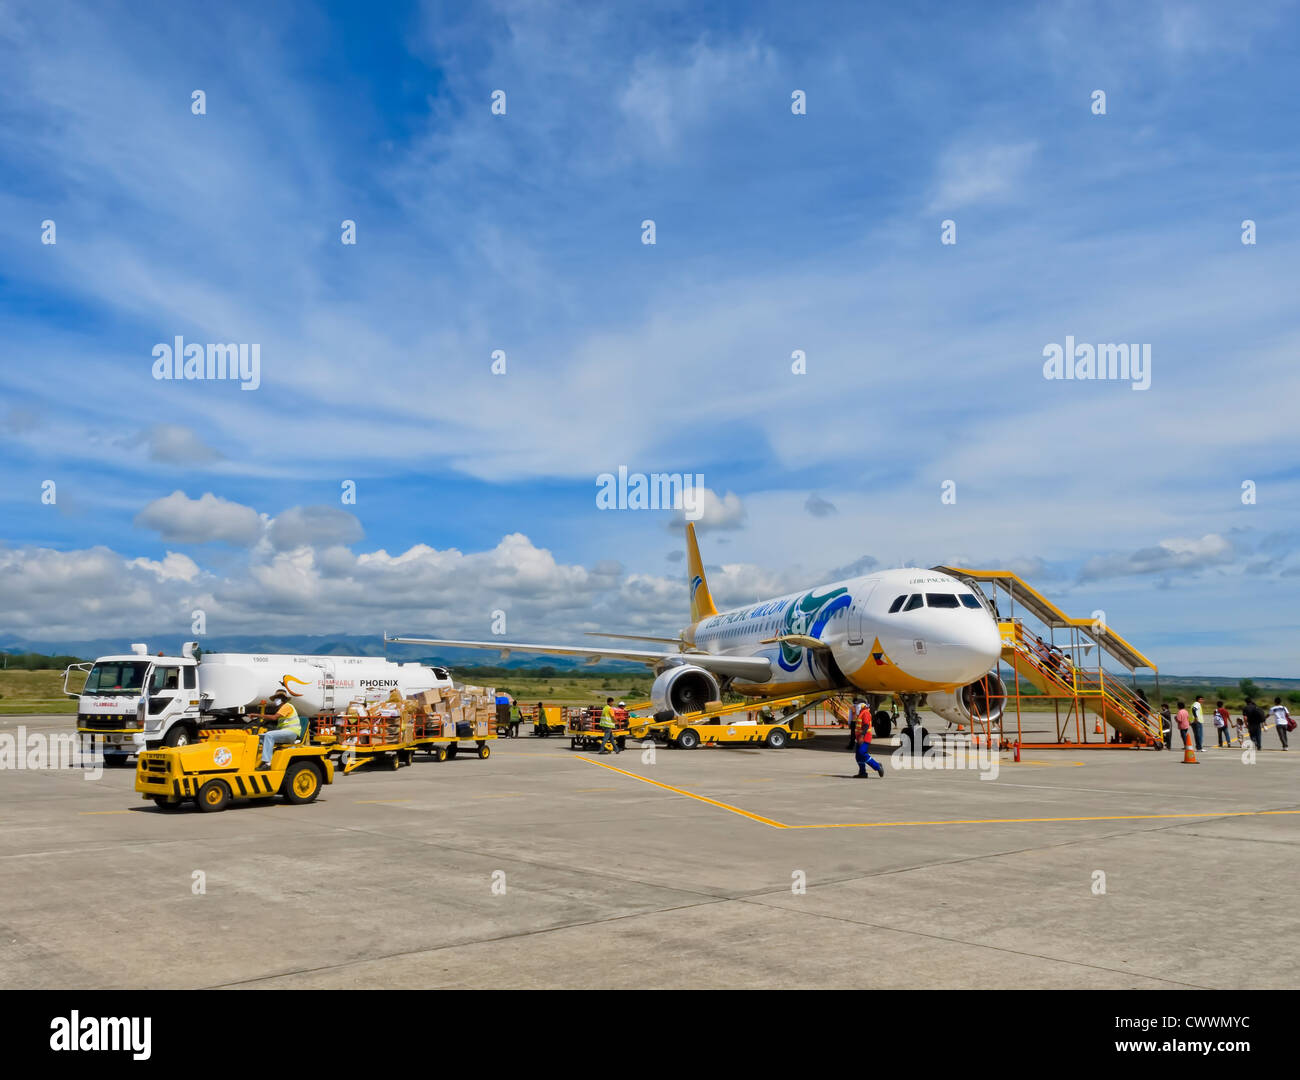 Gensan, Philippines - April 2, 2011: Passengers board a Cebu Pacific airplane bound for Manila, while airport ground personnel p Stock Photo